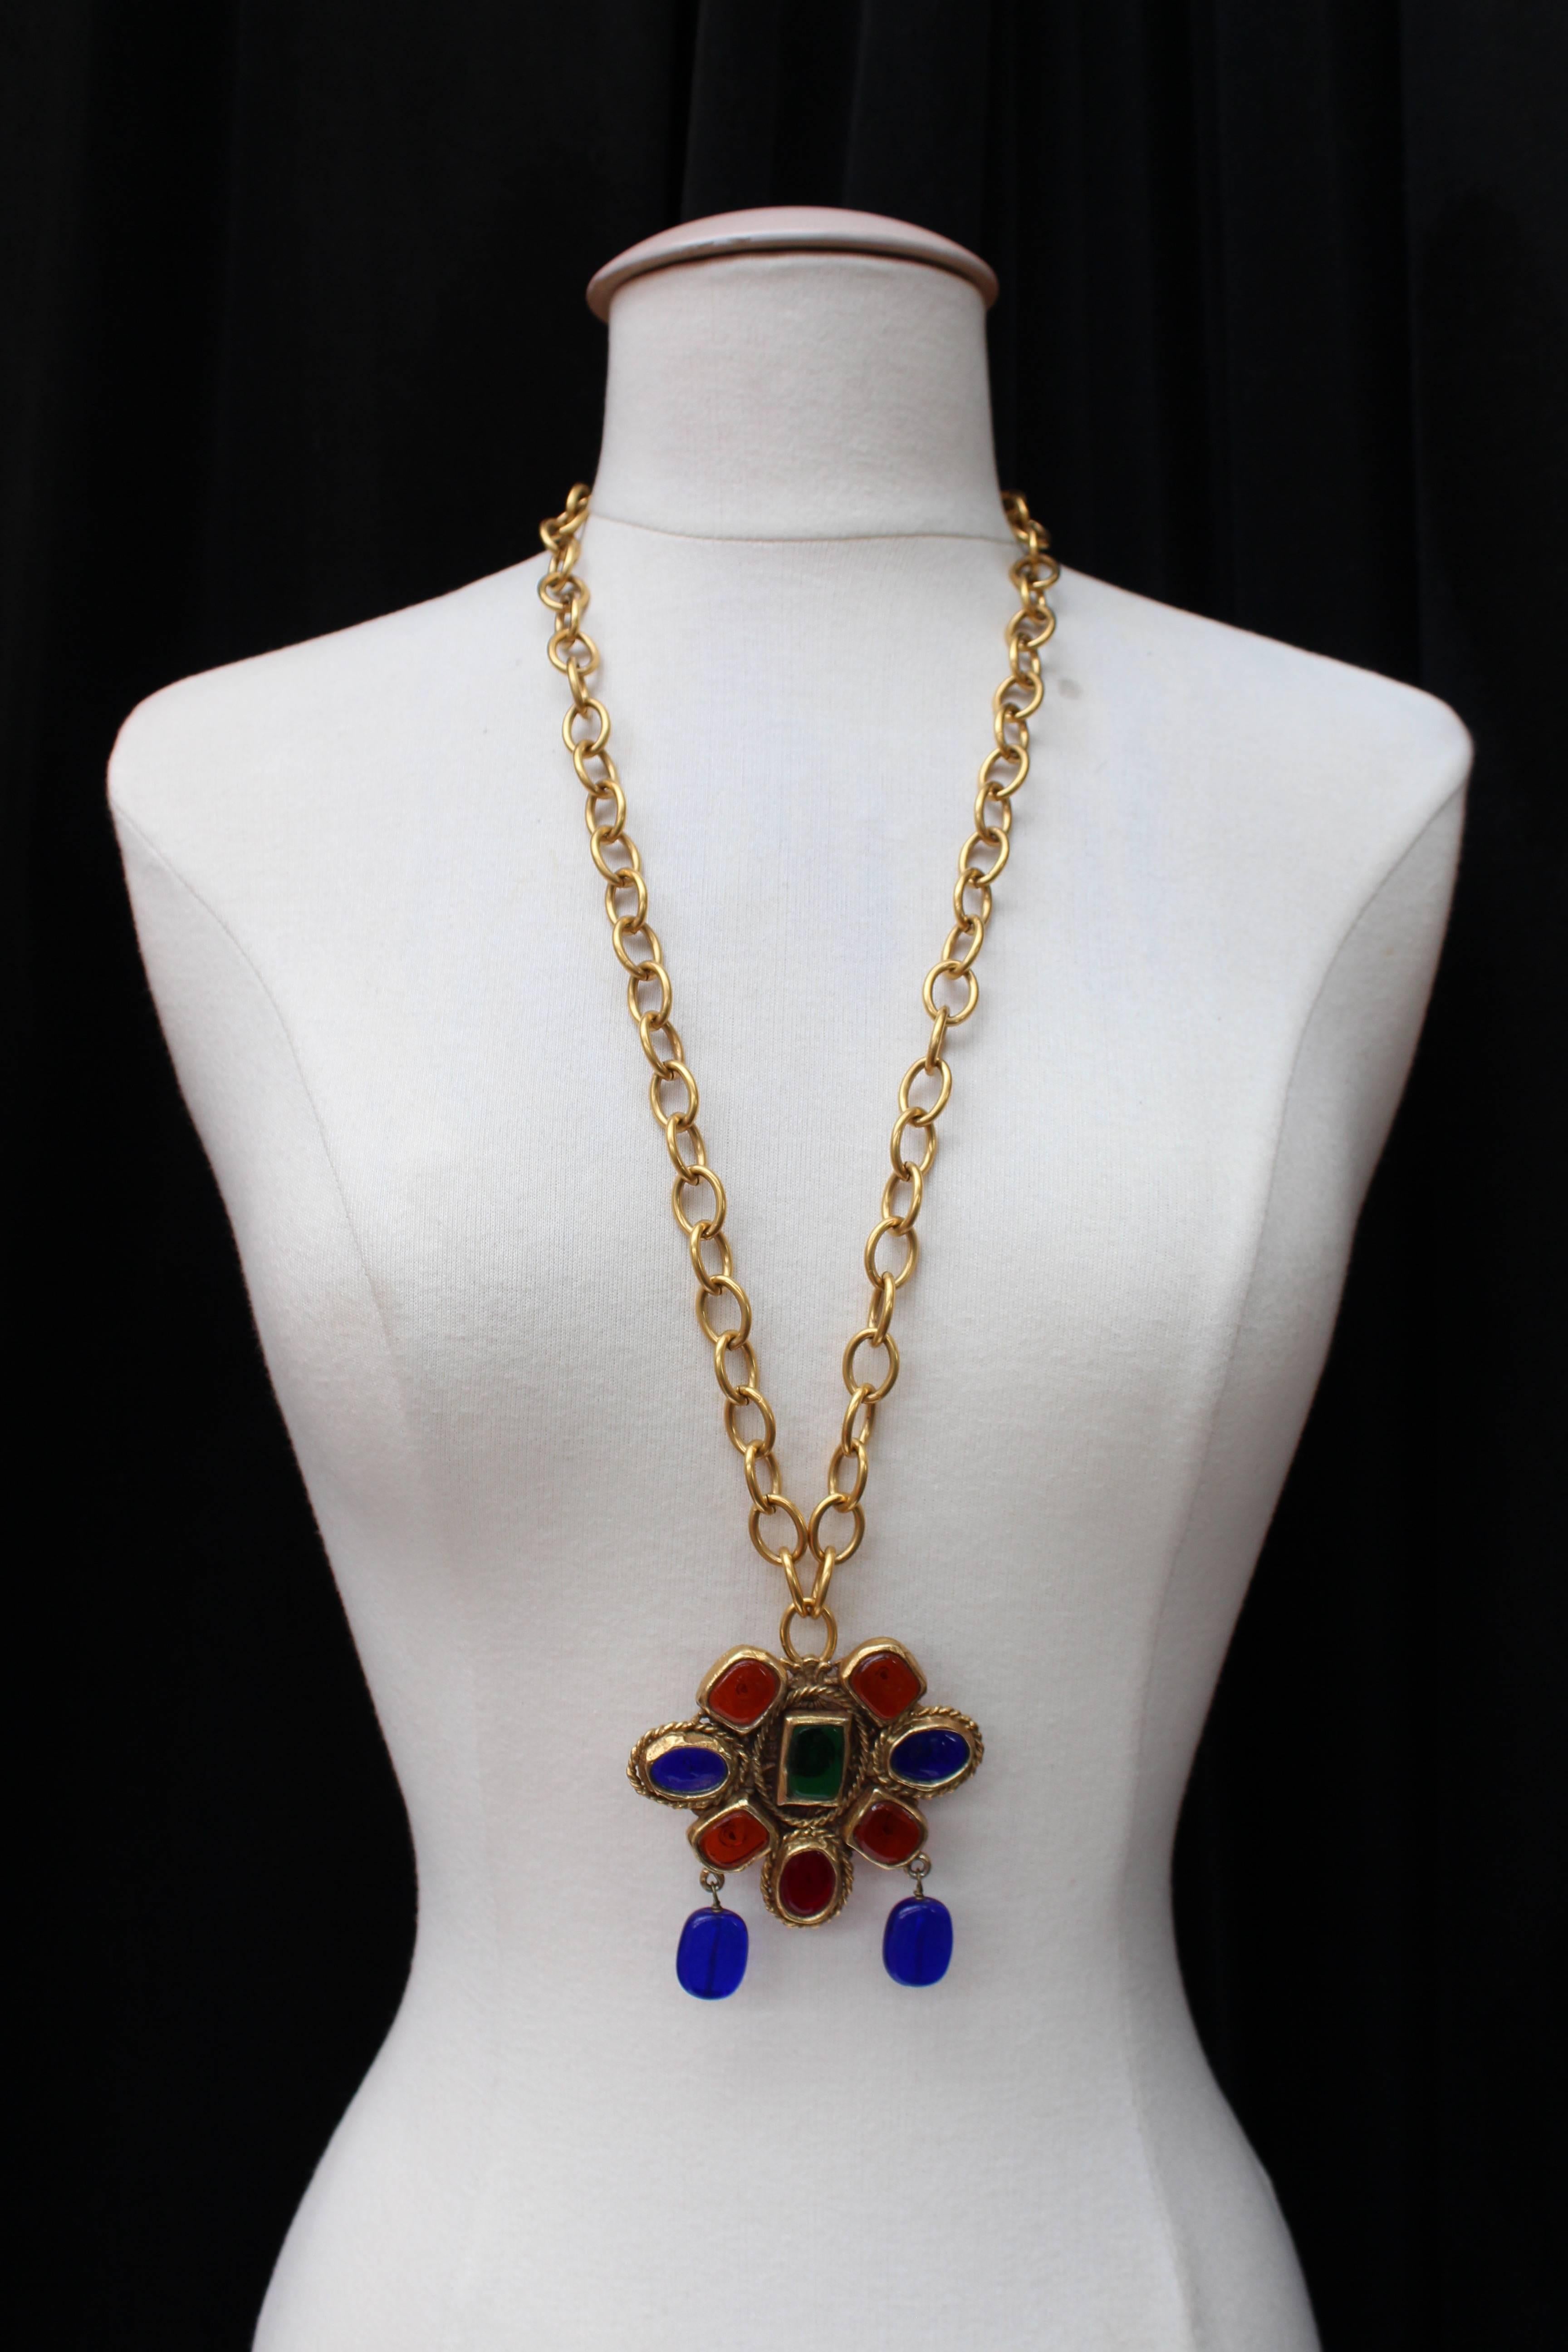 CHANEL (Made in France) Long necklace composed of a gilded metal chain and a pendant paved with glass paste cabochons in sapphire, ruby, honey and emerald colors. Ring clasp.

1984 piece signed at back of the medallion.

Very good